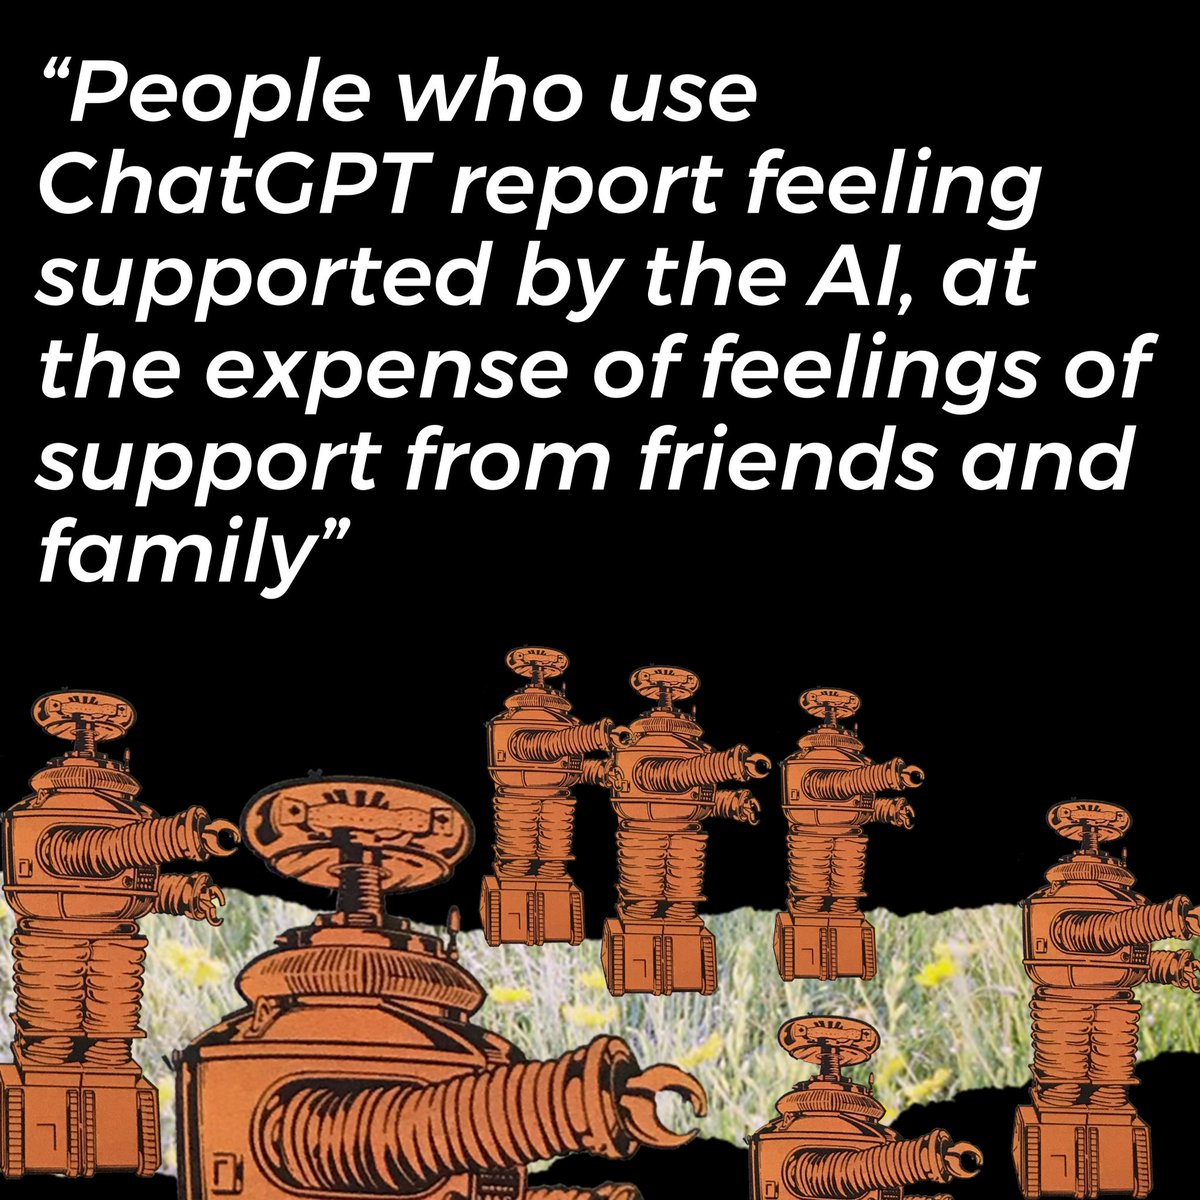 At a time when 1 in 3 Australians are experiencing loneliness, there may be space for AI to fill gaps in our social lives. That’s assuming we don’t use it to replace people. More from our research findings in @ConversationEDU today: theconversation.com/1-in-3-people-…